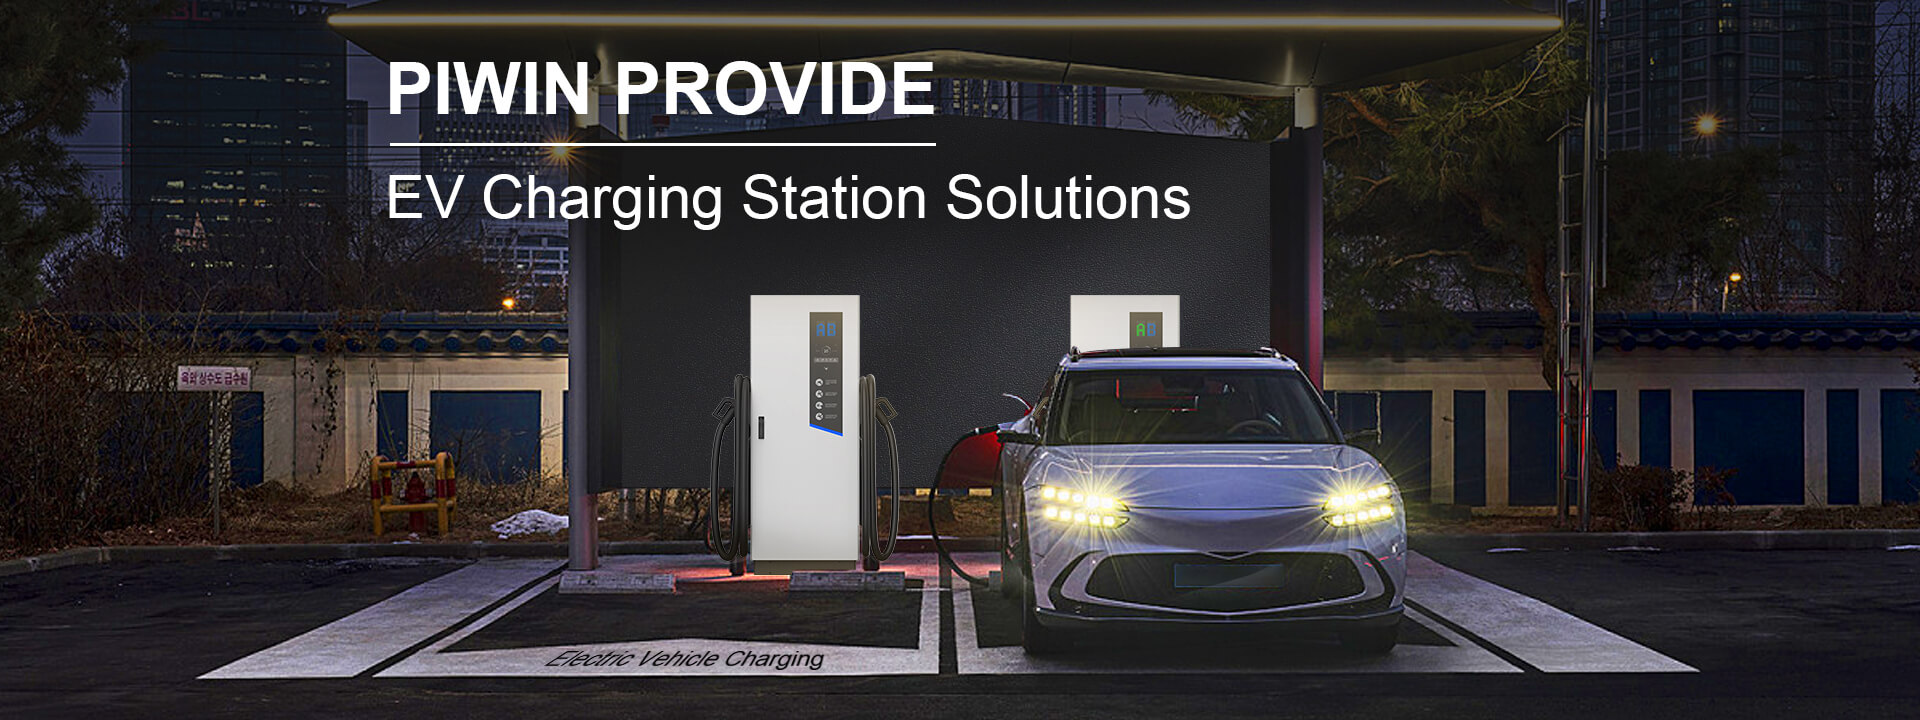 What is meant by EV Charging Stations?  A machine that provides power for the recharging of electric vehicles, such as automobiles, buses, and bicycles, is known as an electric vehicle charging station. EVSEs are an alternate name for EV charging stations (electric vehicle supply equipment). An increase in EV charging stations is required due to the rising popularity of electric vehicles. As more individuals explore methods to lessen their carbon impact, the popularity of electric vehicles is rising.  Why should companies think about putting money into EV infrastructure? The majority of companies can't and shouldn't ignore the following two compelling arguments for providing EV chargers: It's a new chance to draw clients. It's proof that you're committed to promoting green company activities, which are crucial CSR elements in the current market. EV charging stations: The future of electric vehicle infrastructure Piwin is the ideal EV charging stations manufacturer because they offer an eco-friendly substitute for vehicles that run on gasoline, and charging stations are growing in popularity. This all-in-one solution provides fast charging speeds and excellent convenience. With this cutting-edge technology, you may obtain an incredibly quick charge of up to 80%. It is not necessary to use any tools. It only needs a plug to get your electric vehicle charged.  Safe and reliable needs of customers: Customers' requirements for safety and scalability may have led to the development of an EV charging station. All three plugs may be charged concurrently, and it incorporates a cable clamp or reactor for simpler cable management. They are appropriate for use with big commercial vehicles like E-buses, logistics trucks, trash trucks, etc. Any electric vehicle's driver may swiftly hit the road when the battery is ultimately charged. Charge your EV whenever and wherever: The most prominent feature of this EV charging station is that it includes a built-in battery bank, so you don't have to worry about running out of power when away from an outlet. This allows you to charge your EV anywhere, at any time. With this, you won't ever have to be concerned about getting lost when traveling. Using this EV charging station, you may charge your vehicle anywhere, at any time. Giving you electricity, it's a fantastic way to lessen your carbon footprint and boost your independence. Fully charged:  An EV charging station is the most inexpensive choice for users with higher consumption needs. Thanks to EV Charging stations, your cars will be completely charged and ready to go in no time, drastically reducing downtime. In addition, there is a sizable fuel cost difference compared to traditional gas-powered cars, which is advantageous for both the environment and your company. Wherever an electric vehicle charges, the weather may affect how rapidly it charges. Cold weather can significantly affect charging times since EV lithium-ion batteries are very sensitive to low temperatures. Who is the top-notch producer of EV charging stations? The top producer of EV charging stations is PIWIN ENERGY. Your vehicle will take between three and five hours to reach a completely charged condition if you use a PIWIN charging station that can charge at 240 volts and level 2 of electricity.  On the other hand, the most cutting-edge charging station is the PIWIN ENERGY producer. The shortest length of time imaginable can be achieved with this station, which can fully charge your vehicle in a short period. We produce our products with the highest-quality materials while also paying close attention to the needs of our customers. Your electric vehicle now has access to a strong and capable charging source thanks to the development of this charging station. It is excellent for routine use around the house. Any garage could use its design. It is easy to use and simple to set up. We welcome you to look around our website as we believe we are among the most dependable EV charging stations manufacturer. The benefits of installing EV charging stations: A secure, dependable, and affordable method for charging electric vehicles or other EVs is offered by EV charging stations. It has a strong battery bank, an integrated inverter, and a high-power charger. There are more charging stations now than there were before the introduction of electric cars. The battery pack is intended to serve as a backup power supply for residences and commercial buildings. It can store enough energy to offer backup power for several hours. These charging stations are among the most practical options for electric vehicle charging. Without having to worry about running out of energy or paying high prices, it may charge your automobile wherever you are and whenever you want. Attract more clients: EV drivers could make a brief pit stop to top up their vehicles. Businesses may increase foot traffic from this group by installing EV charging stations; it has been discovered. Commitment to clean air: A combination of hazardous gases and compounds can be found in automotive exhaust from gas and diesel engines. Human health is harmed by air pollution. Communities may take a significant step toward cleaner air by switching as much of their local driving to electric cars with zero emissions.  Environmental justice is supported by electric automobiles: Residents who live close to roads and freight routes suffer significant health effects from traffic pollution. According to research, children who live within 246 feet of a highway have an increased chance of developing asthma. Vehicle emissions affect adjacent areas by generating traffic congestion, protection matters, pavement damage, and disturbance, inner and outside contamination, and health effects on people's quality of life. Another issue is the added financial burden that drivers often have to fill their petrol tanks. Lower-income drivers are more likely to be trapped paying a sizeable portion of their income family budgets rather than being able to buy a newer, low-emissions car. Electric cars are a part of the answer since they have cheap fuel prices, quiet engines, and no exhaust emissions. Many governments provide better incentives so those with lesser incomes can buy an EV and a charging station. Why is Piwin the top maker of EV charging stations? Numerous advantages Piwin EV charging stations manufacturer provides can help you save time and money. They can offer turnkey solutions. Manufacturers of EV charging stations can provide you with the necessary tools, installation services, and maintenance services so you can set up a charging station. They offer our clients the most significant goods and services, which has helped us become the top producer of EV charging stations. We provide a wide range of services intended to assist our clients in utilizing our goods more successfully, in addition to an extensive range of items created to satisfy their needs. Electric vehicle (EV) charging stations must be dependable and of the highest caliber to meet the increasing demand for EVs. Manufacturers of EV charging stations must satisfy the requirements of a wide range of clients, including people, companies, and governmental agencies.  Additionally, they are subject to rigid safety and quality regulations. They have the skills and experience necessary to give you the top EV charging goods available thanks to their many years of experience. One producer of EV charging stations is increasing its manufacturing capability to continue with the increasing requirement for electric vehicles.  Safety advice for EV charging stations:  Always abide by the instructions given by the manufacturer when charging your car. It's better to delay charging the electric car's battery until after you use it. It is recommended to wait until the batteries have cooled before charging them in an electric vehicle for safety reasons. Charging components should be kept up high and out of the way while not in use. It is crucial to ensure that all parts are in good working condition and that there are no signs of abuse or damage before using a public charging station. By doing this, the charging station's safety will be ensured. If you have a home unit situated in a carport or another open area, ensure the outlet is covered. By doing this, water won't enter the outlet itself. Conclusion: If you're considering switching to electric vehicles, Piwin, the leading EV charging stations manufacturer, offers this opportunity to charge your vehicles quickly. As the popularity of electric vehicles increases, so does the need for auto charging stations. For long-distance or road travel, PIWIN created the eV charging stations. It has been examined and shown to function admirably in frigid climates. Electric car charging is made simple and secure by these charging stations. They are ideal for both households and businesses. To remain competitive in the modern marketplace, we provide the best items to our clients. That entails having the flexibility to respond rapidly to shifting fashions and consumer expectations. 